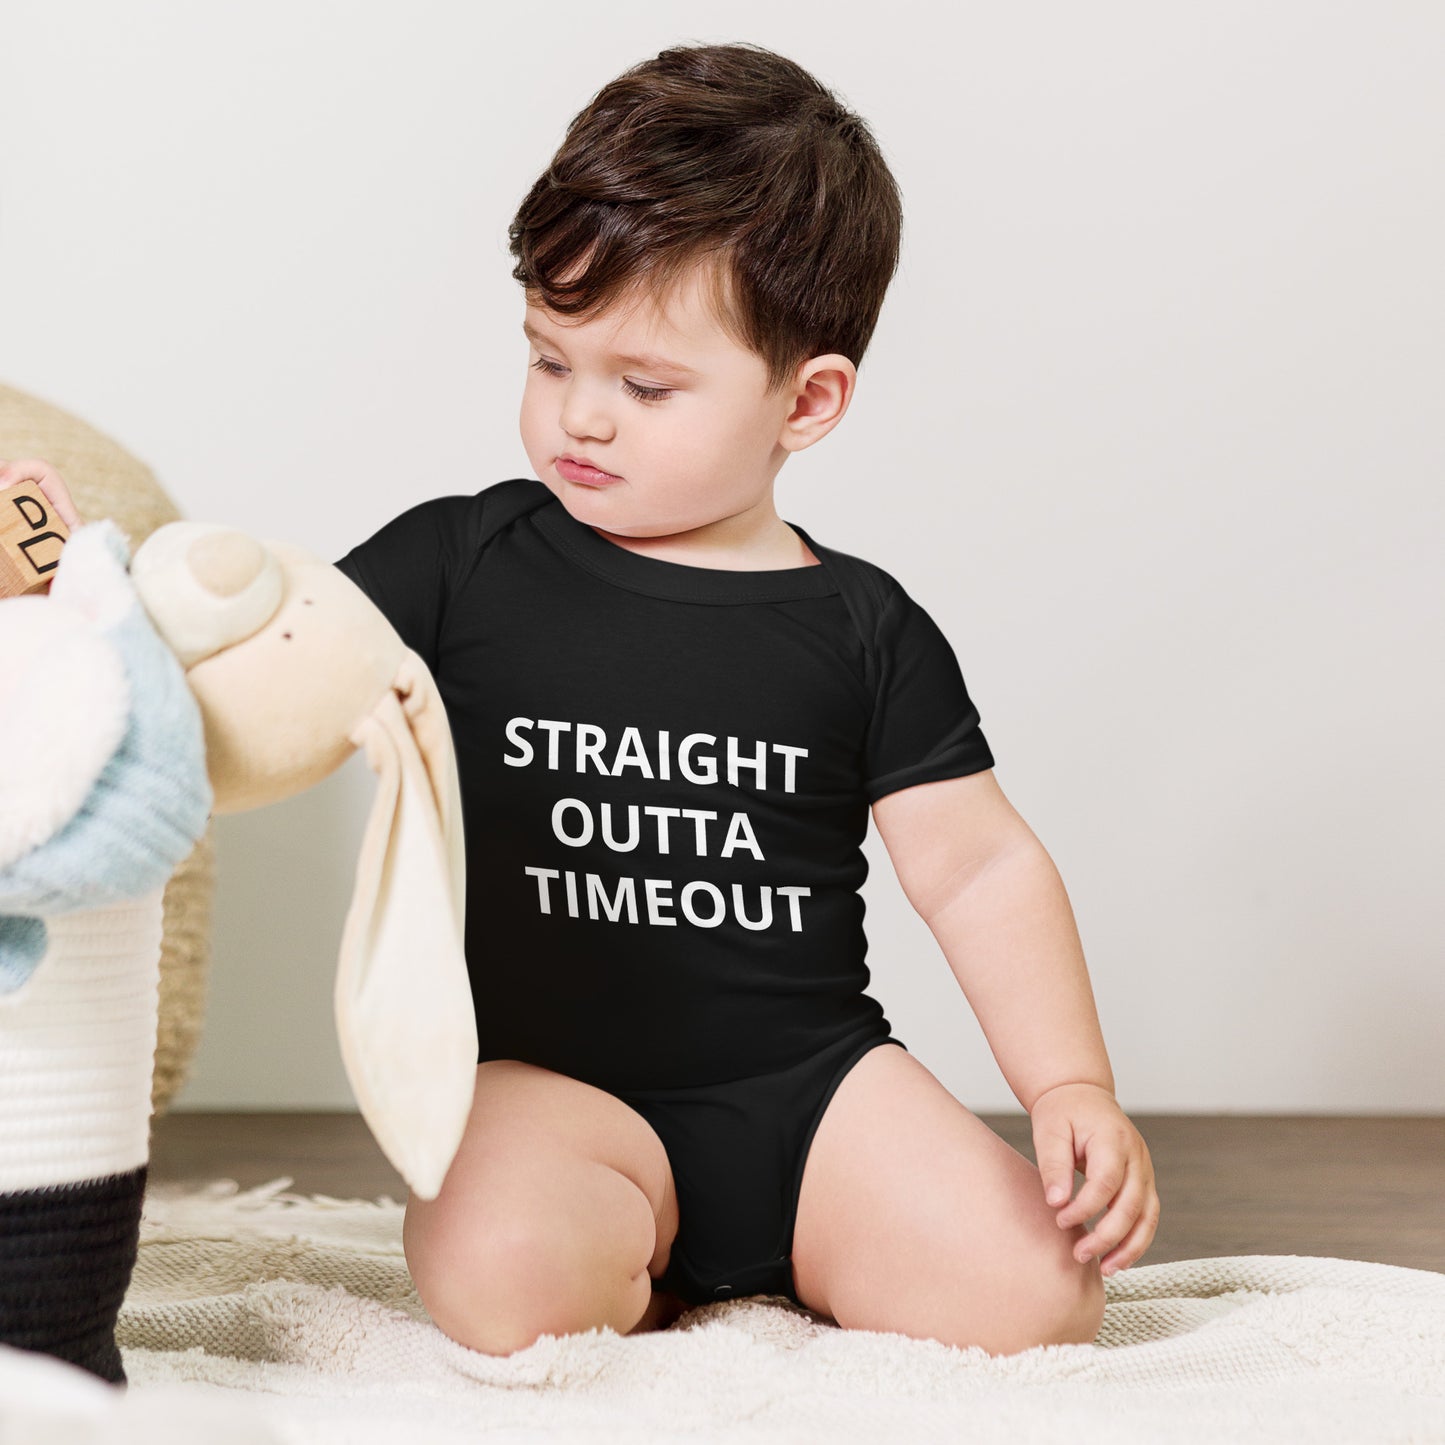 STRAIGHT OUTTA TIMEOUT  Baby short sleeve one piece